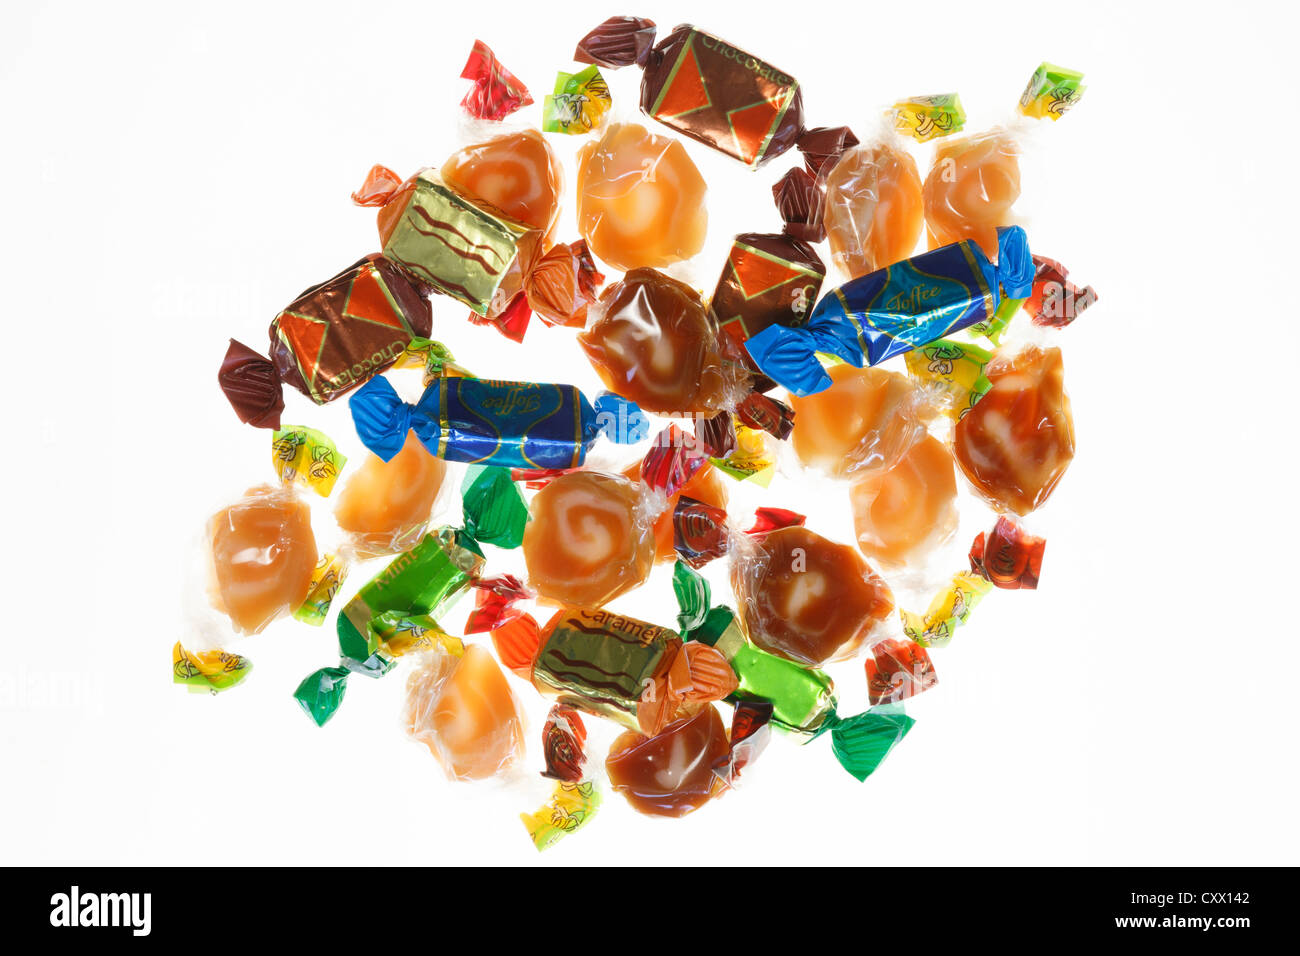 A selection of toffees wrapped in cellophane and backlit on a white background Stock Photo